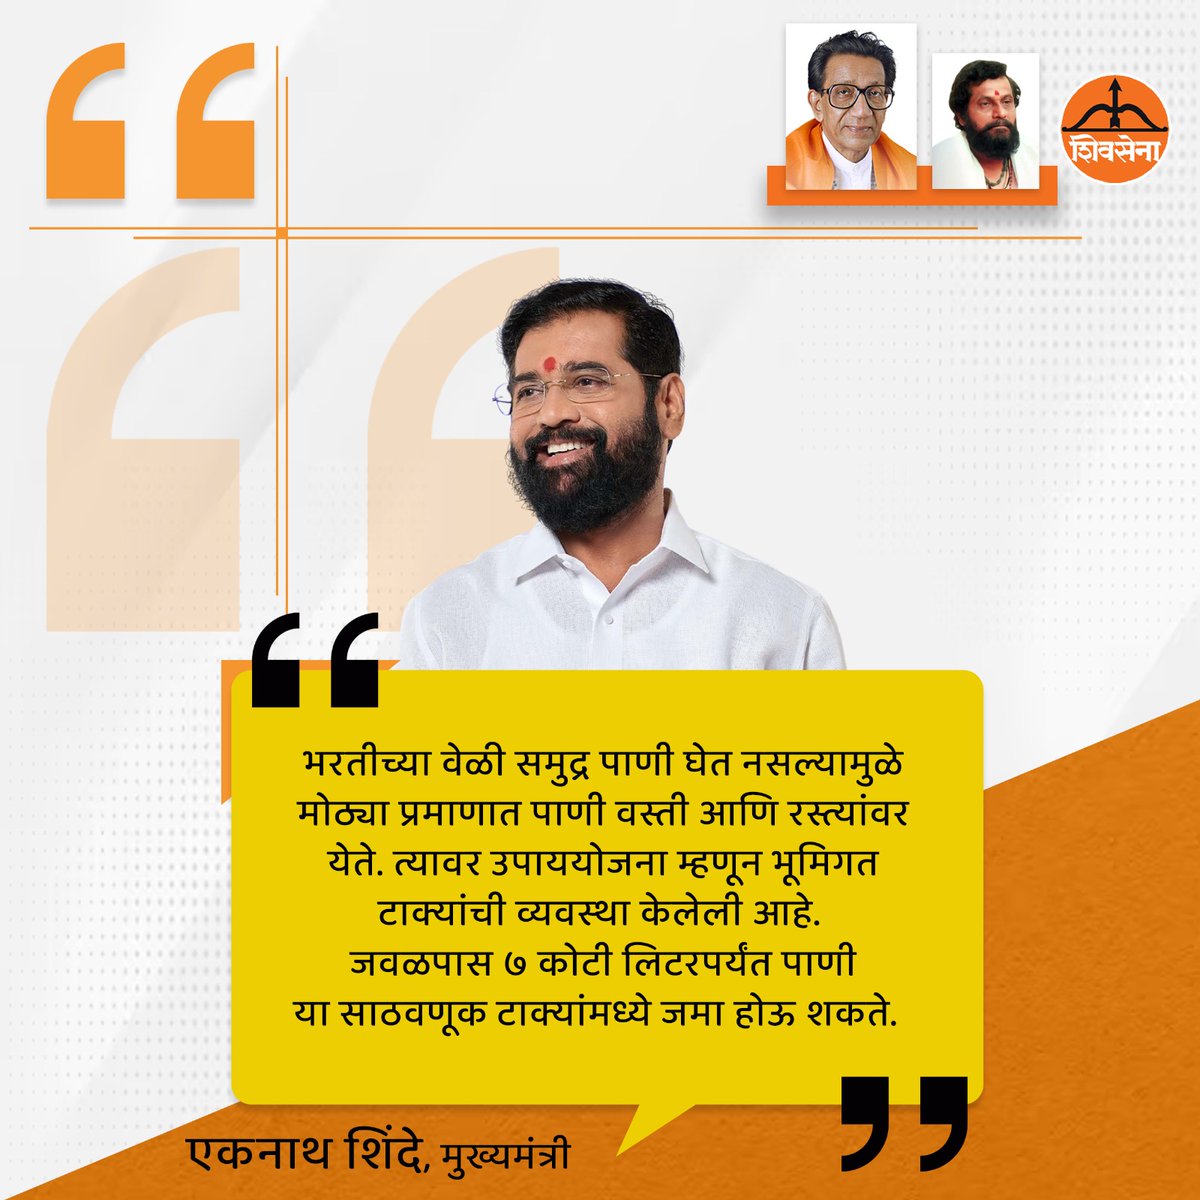 During high tide, a large amount of water enters the settlements and roads. To solve this issue, underground tanks have been arranged. These storage tanks can accumulate up to 7 crore liters of water. @mieknathshinde